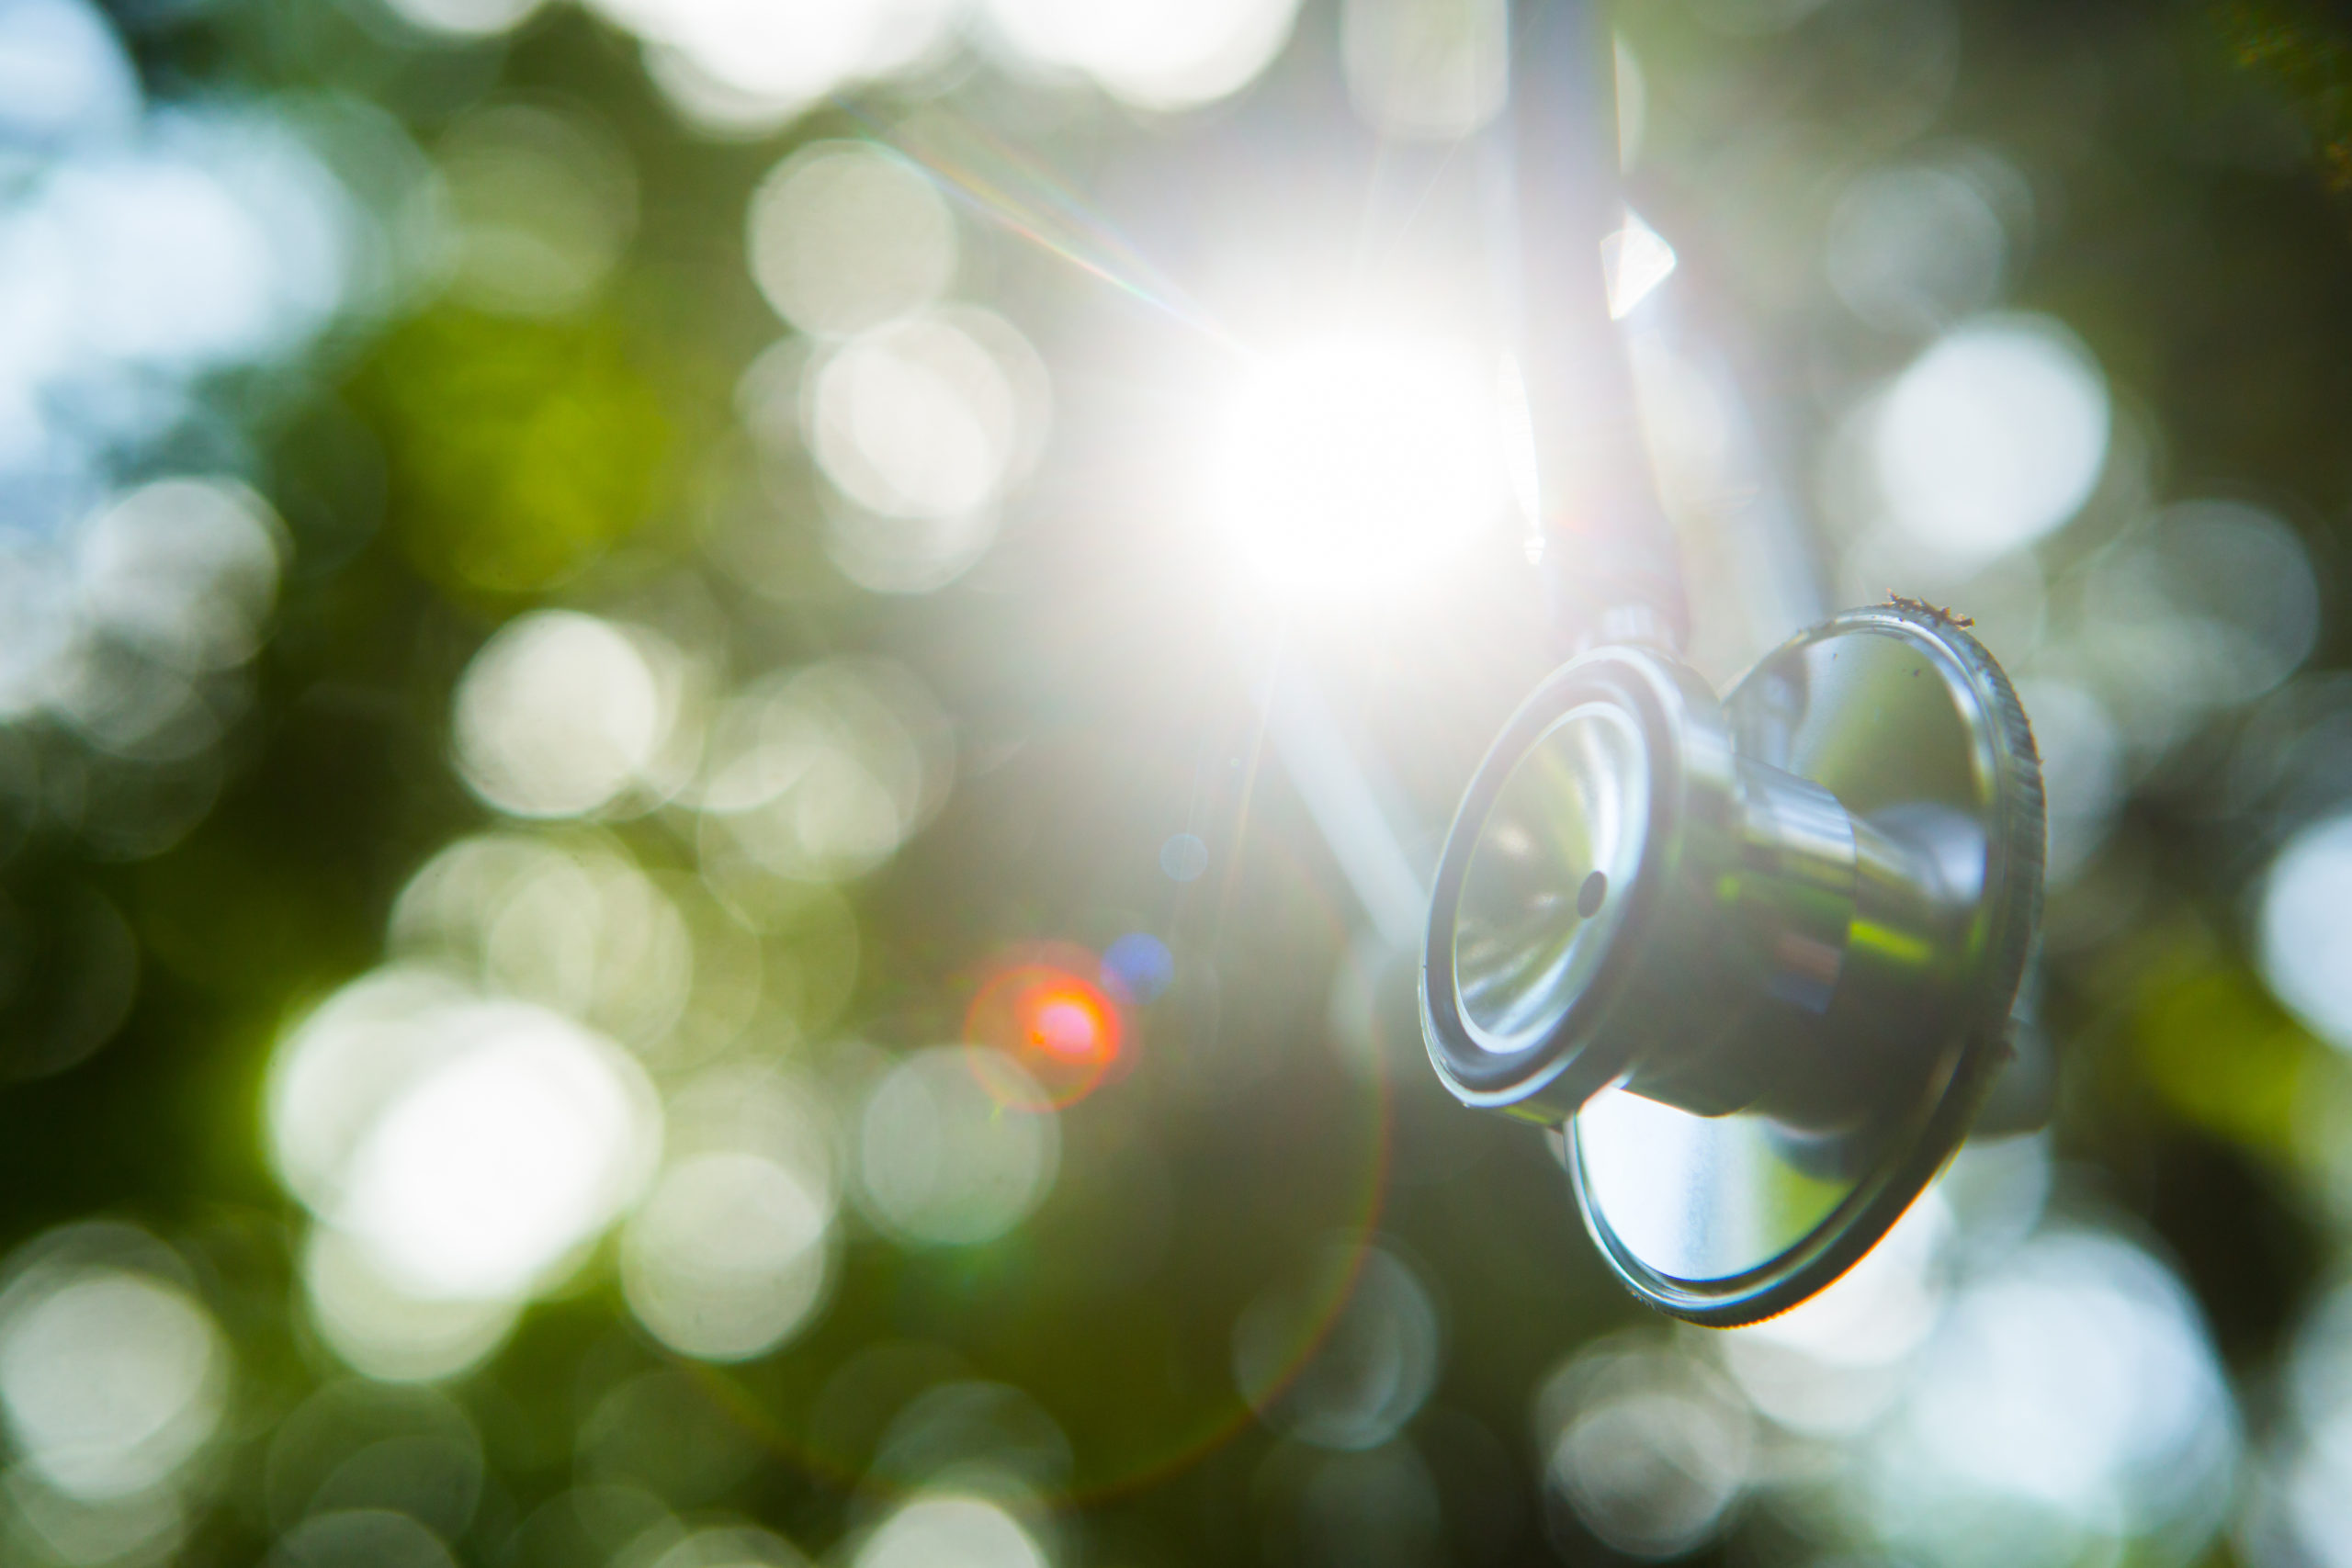 Image of a stethoscope in front of a blurred nature scene with the sun peeking through branches.